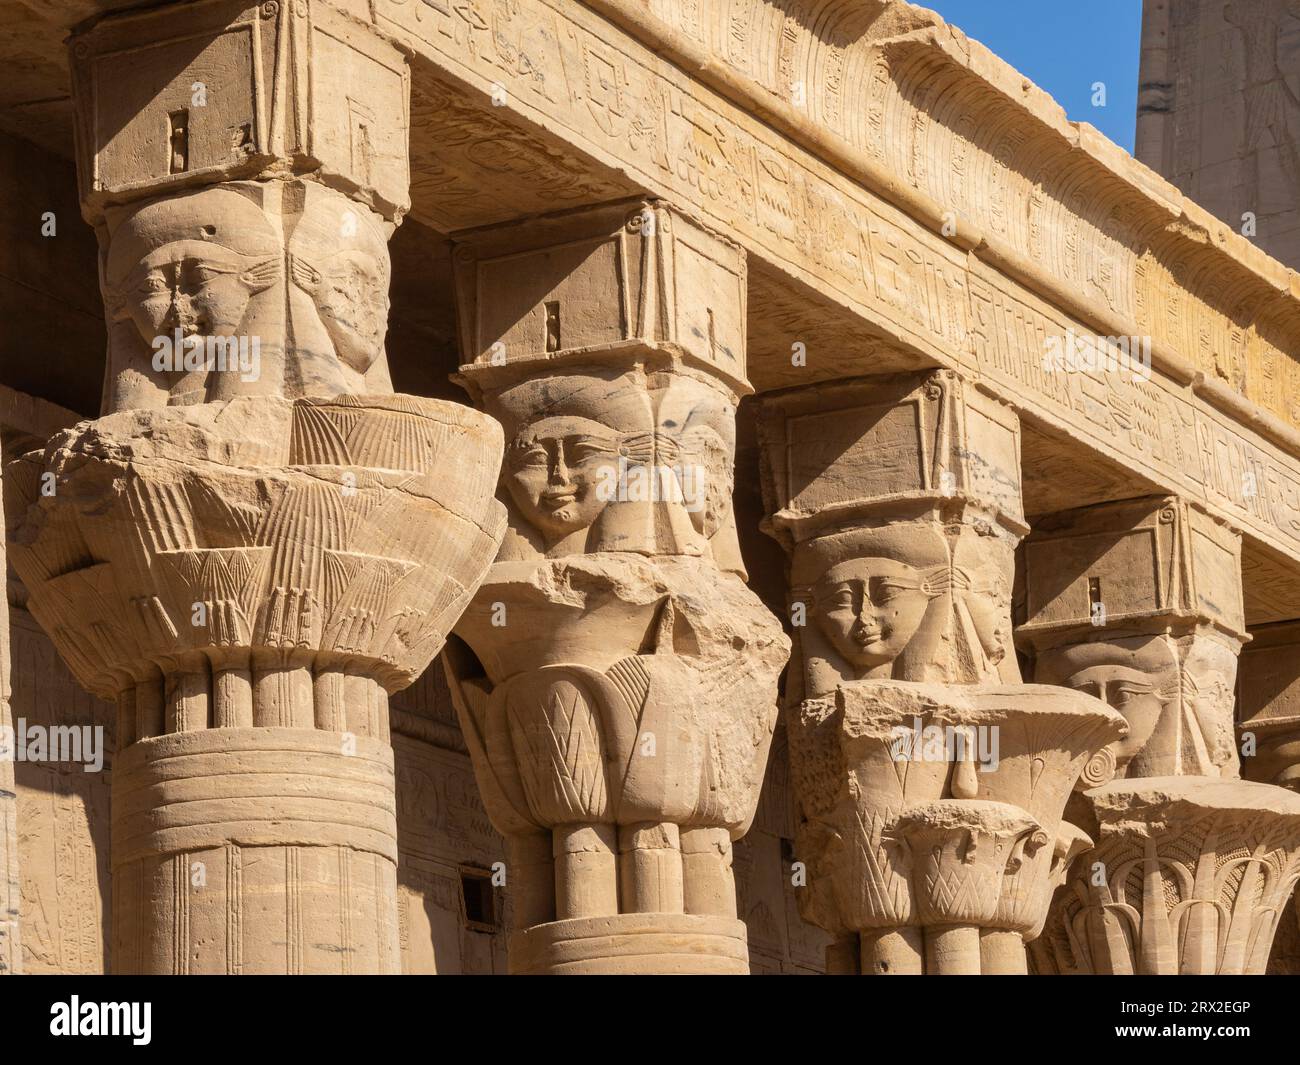 Columns at the Philae temple complex, The Temple of Isis, currently on the island of Agilkia, UNESCO World Heritage Site, Egypt, North Africa, Africa Stock Photo